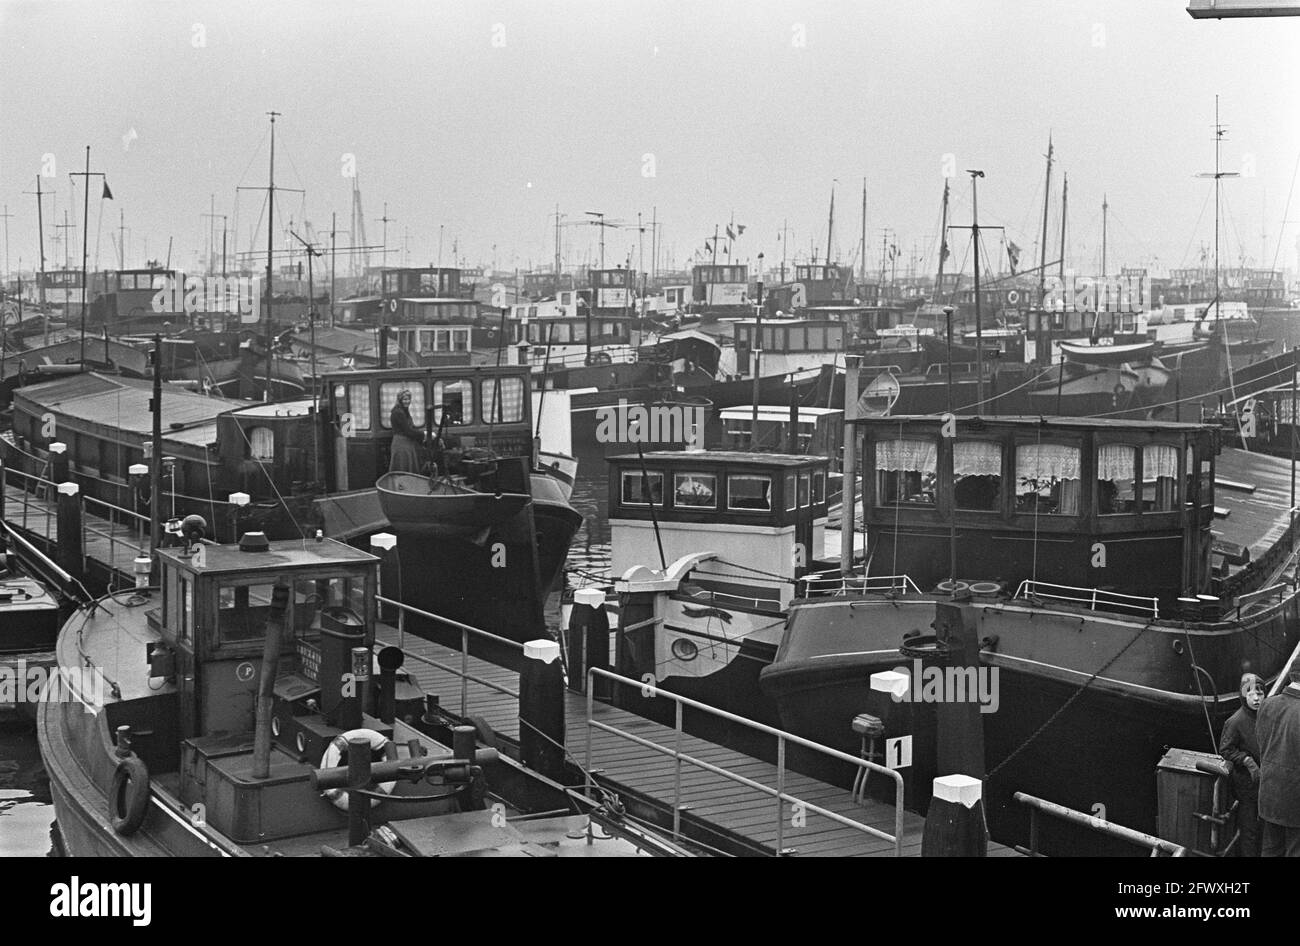 Protest-action of inland shippers, in the harbor in front of the Houtman quay 200 ships are waiting for cargo, January 18, 1967, BINNENSCHIPPERS, Prot Stock Photo